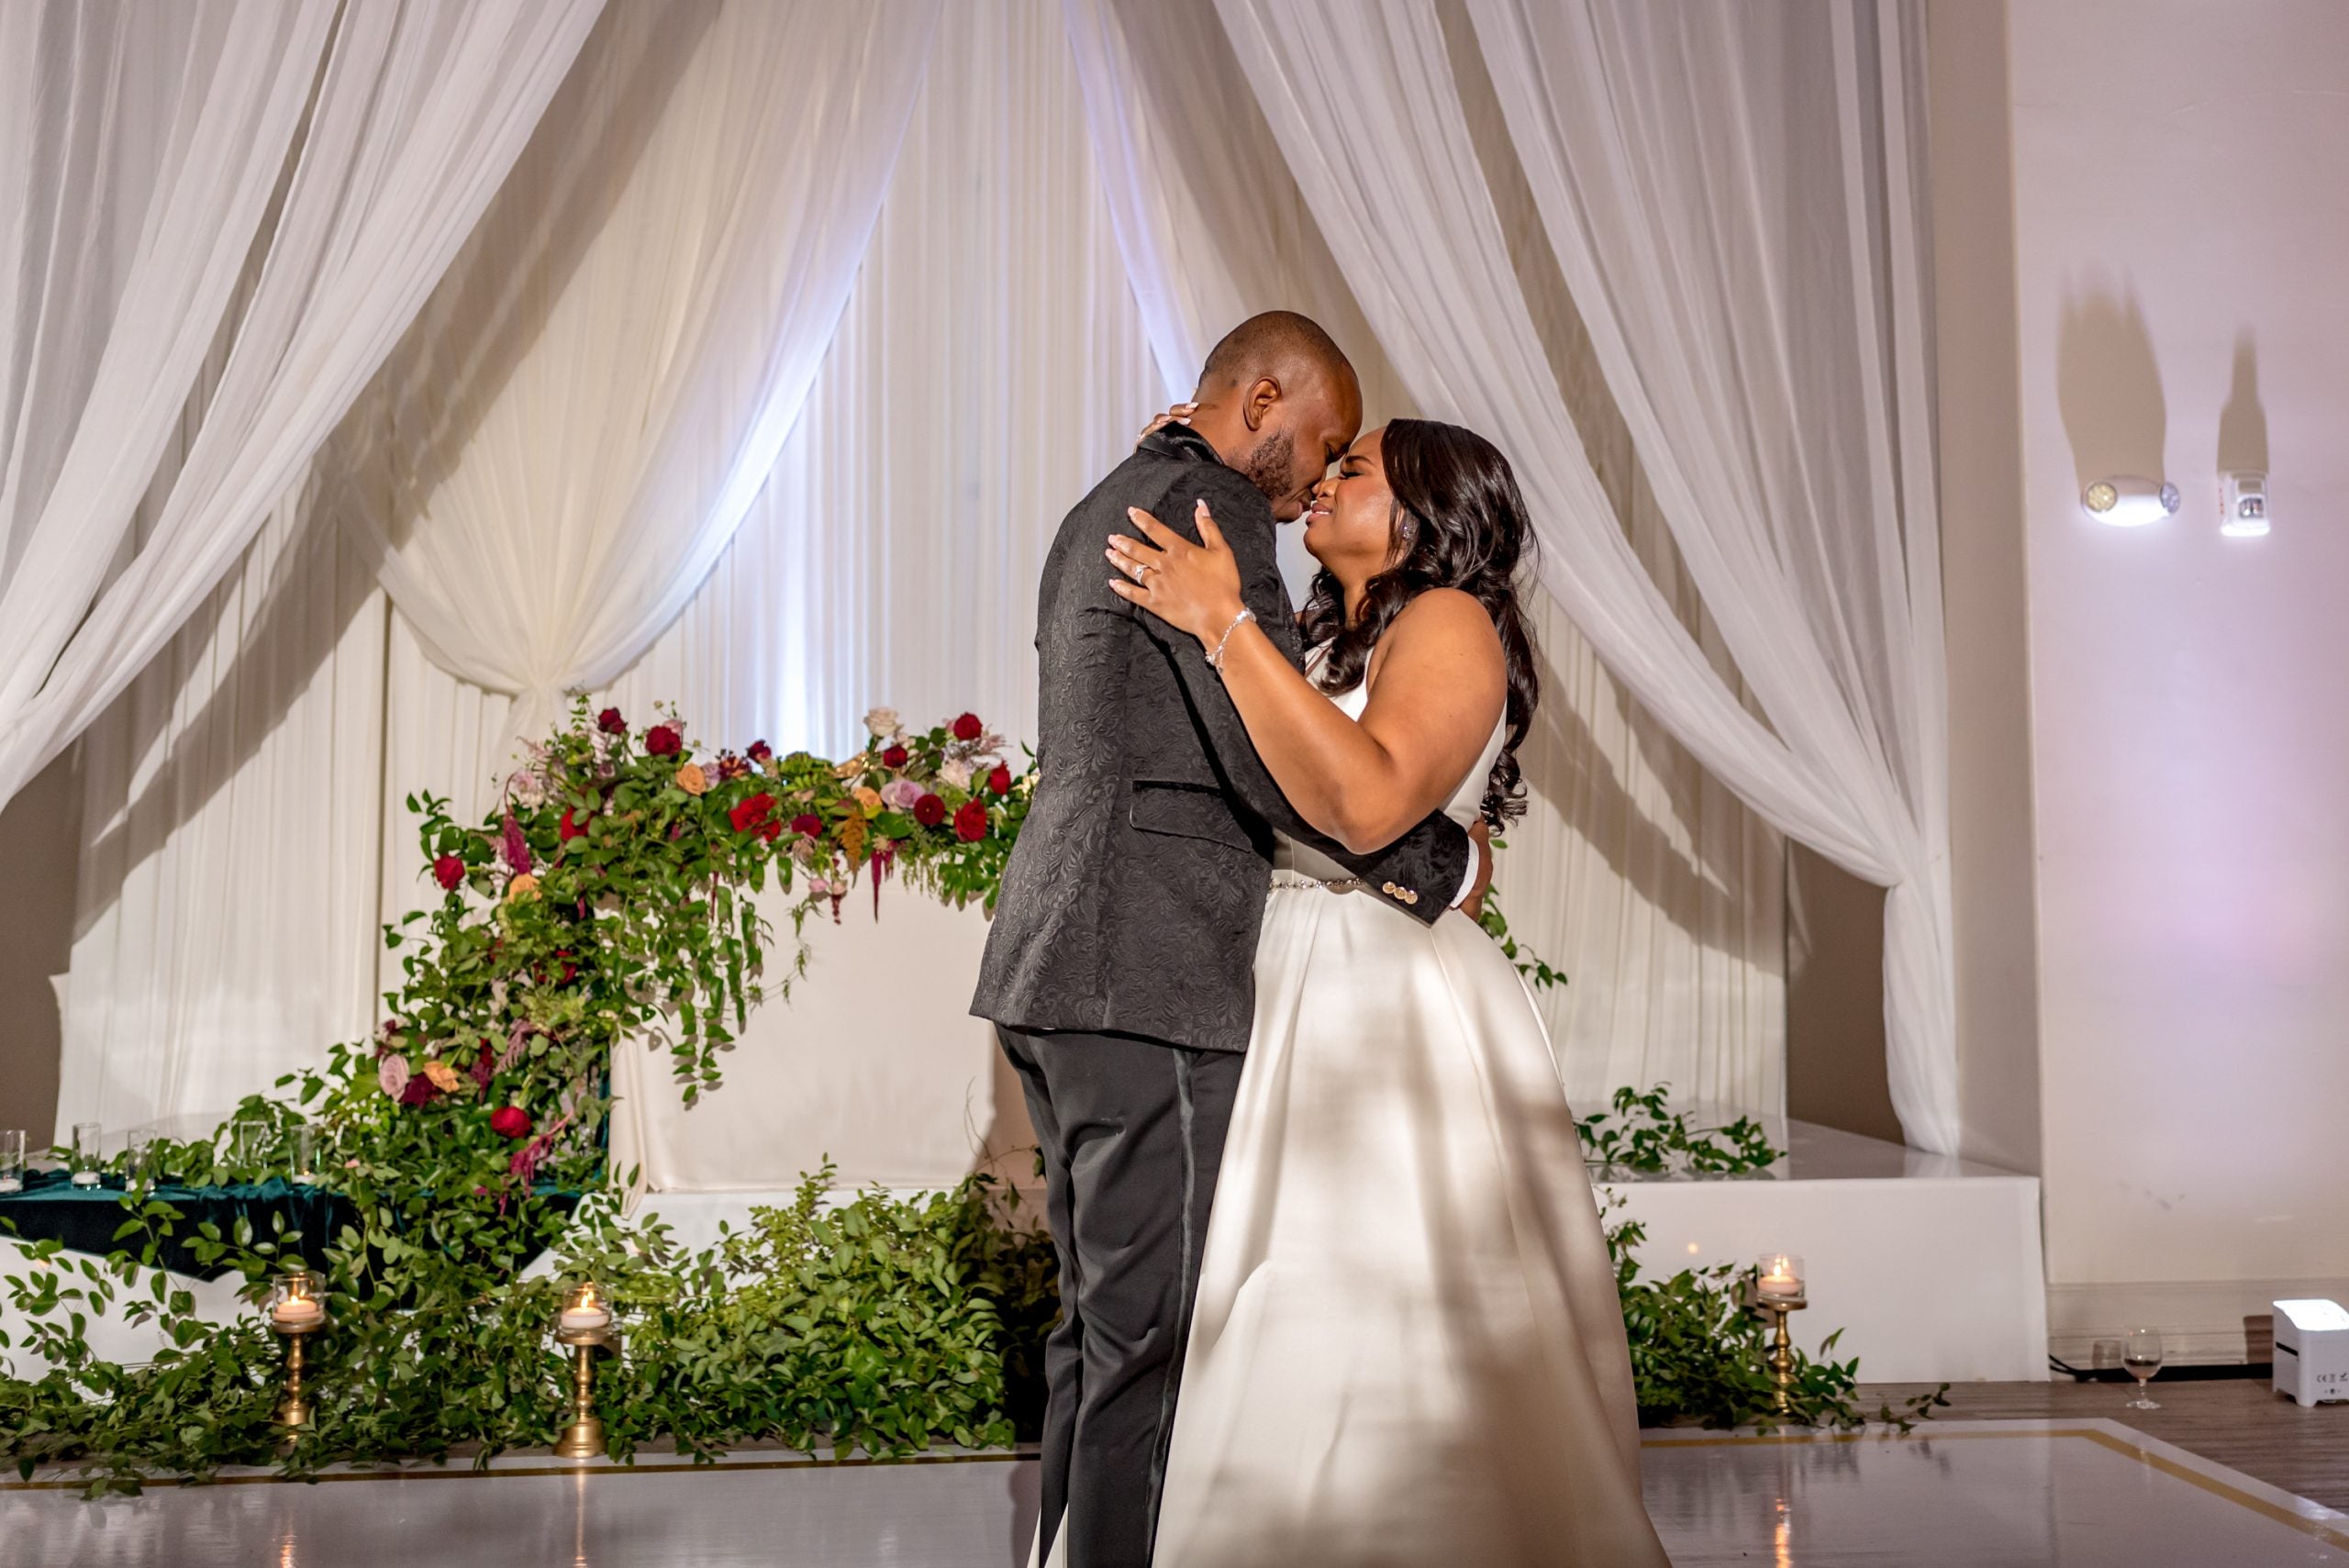 Bridal Bliss: Love Was Overflowing At Karl and Sydnie's Texas Wedding